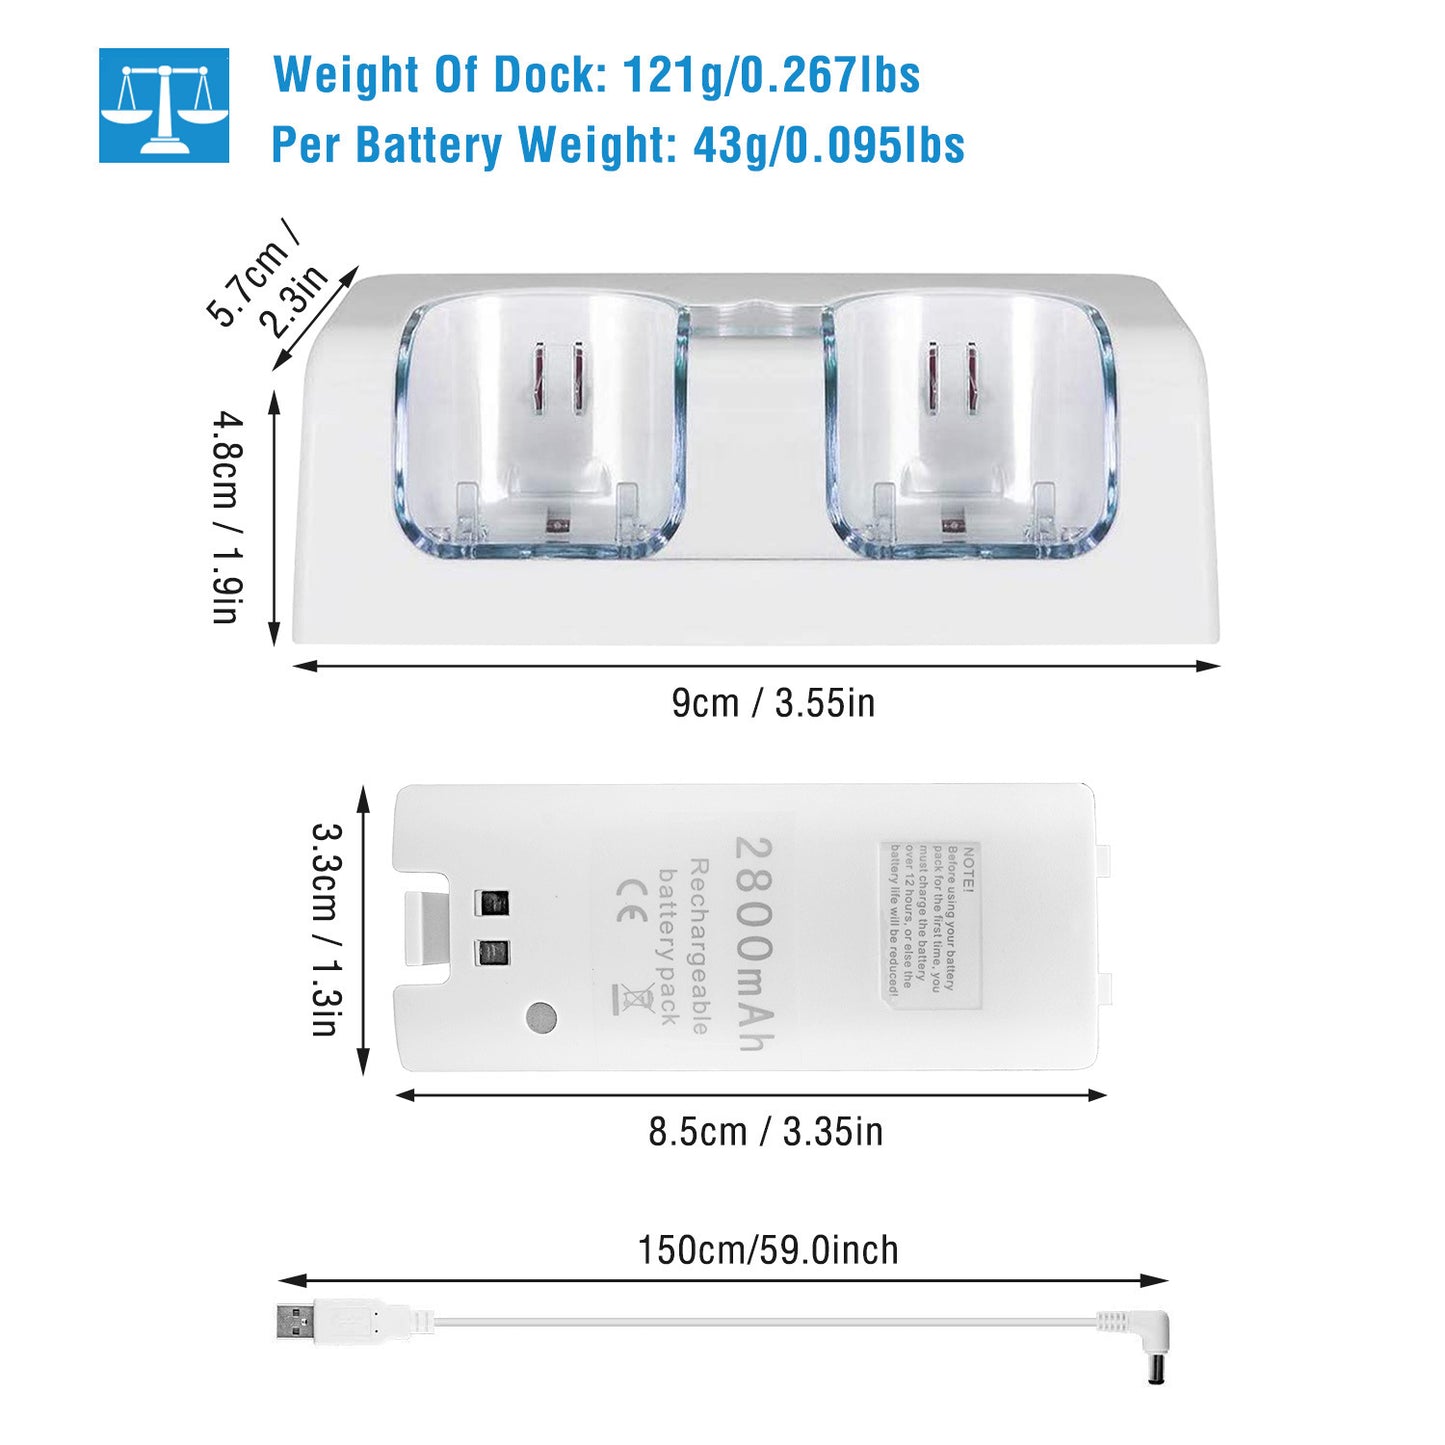 For Wii Remote Controller Charger Dual Charge Dock with Two 2800mAh Rechargeable Batteries